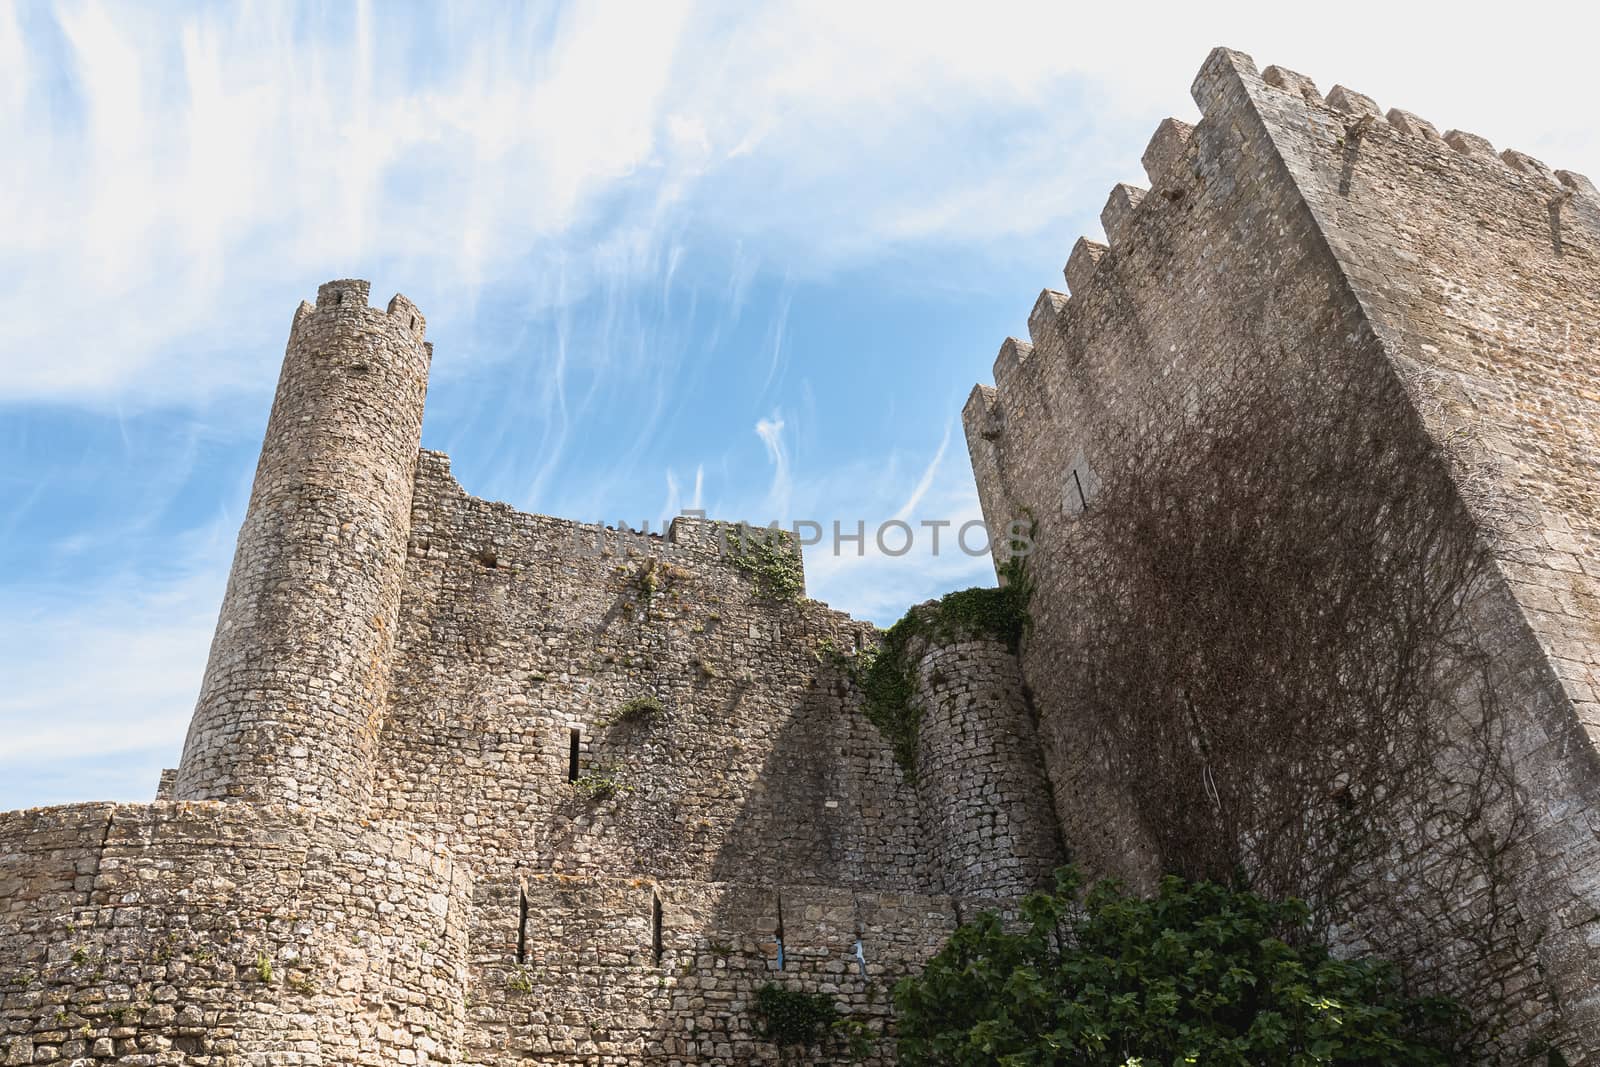 Obidos, Portugal - April 12, 2019: architectural detail of the medieval castle of Obidos on a spring day